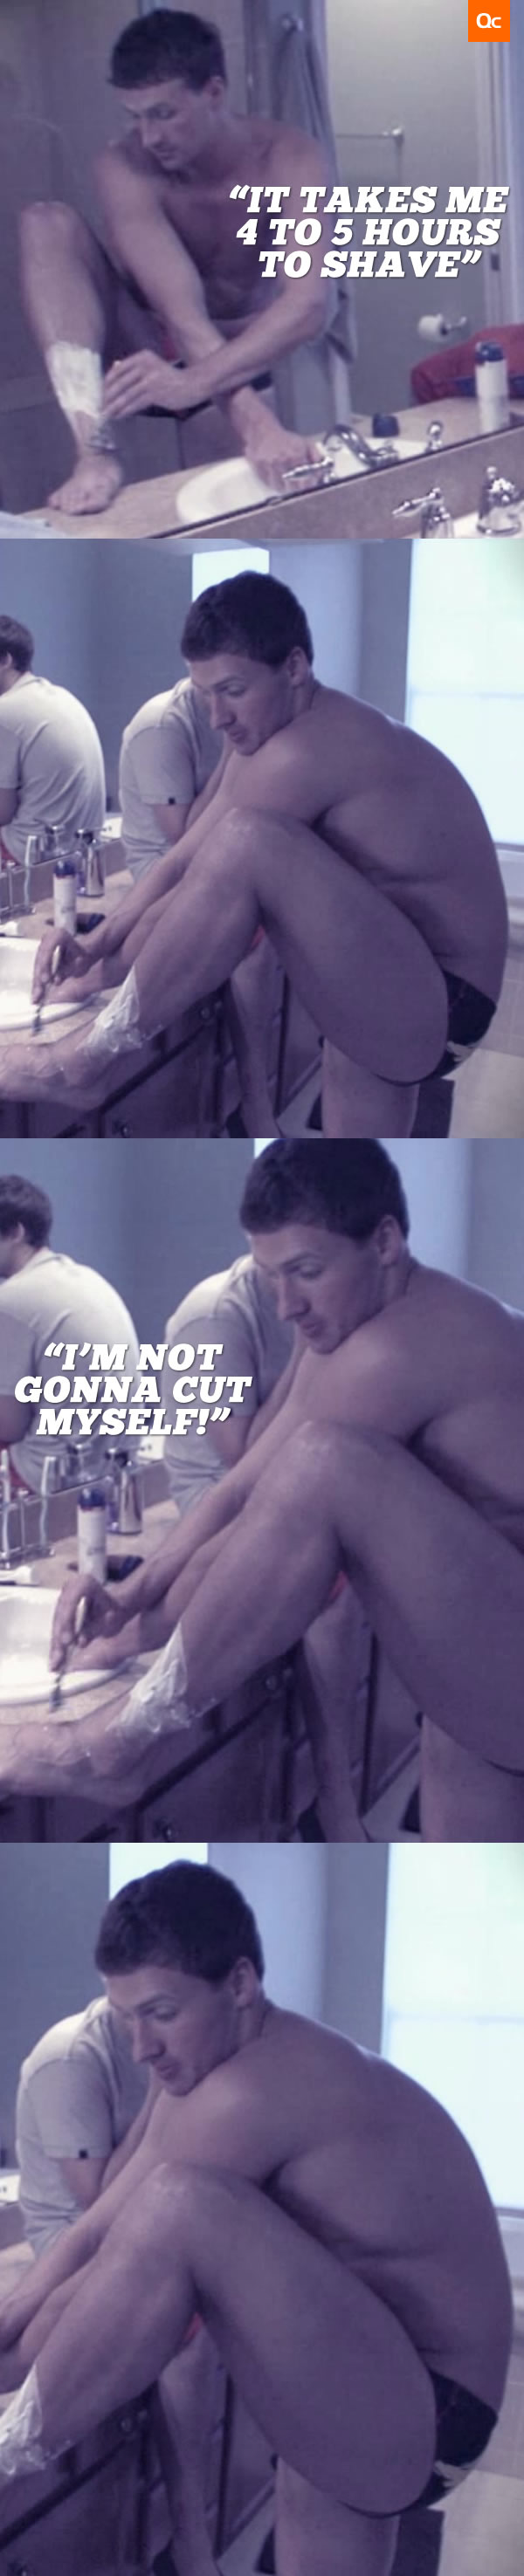 Ryan Lochte Shaving With Gold-Plated Razors